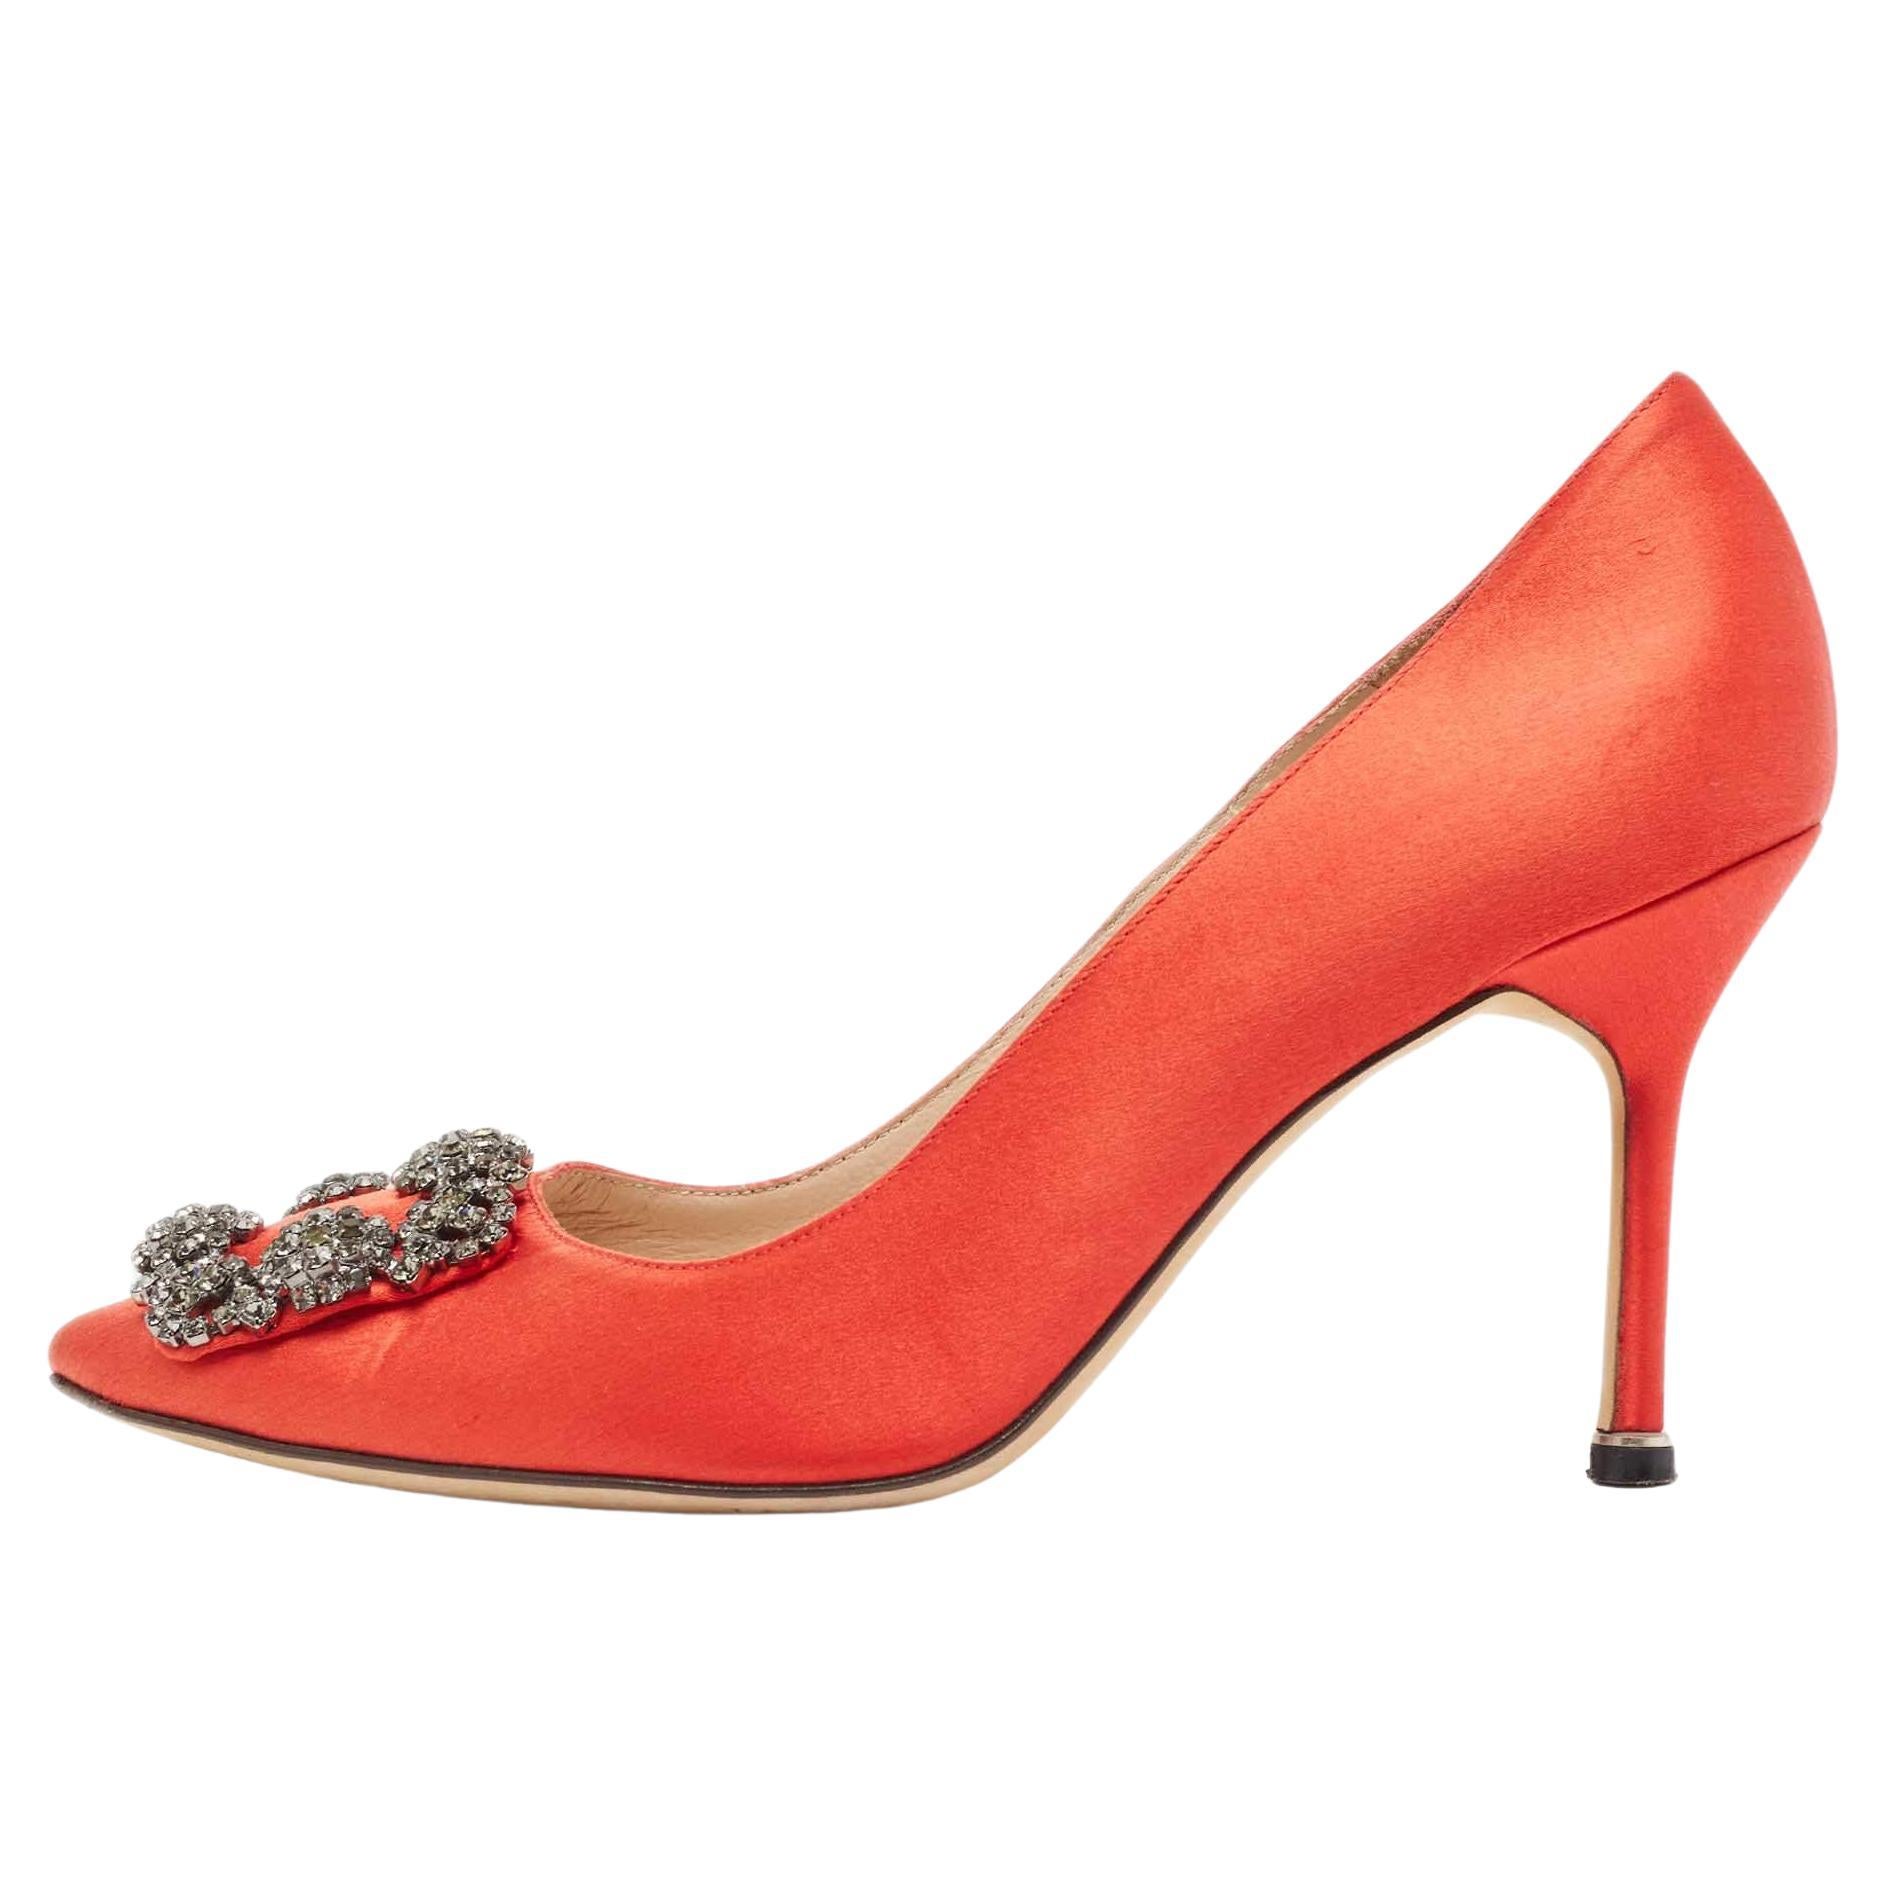 Manolo Blahnik Red Satin Hangisi Pumps Size 37 For Sale